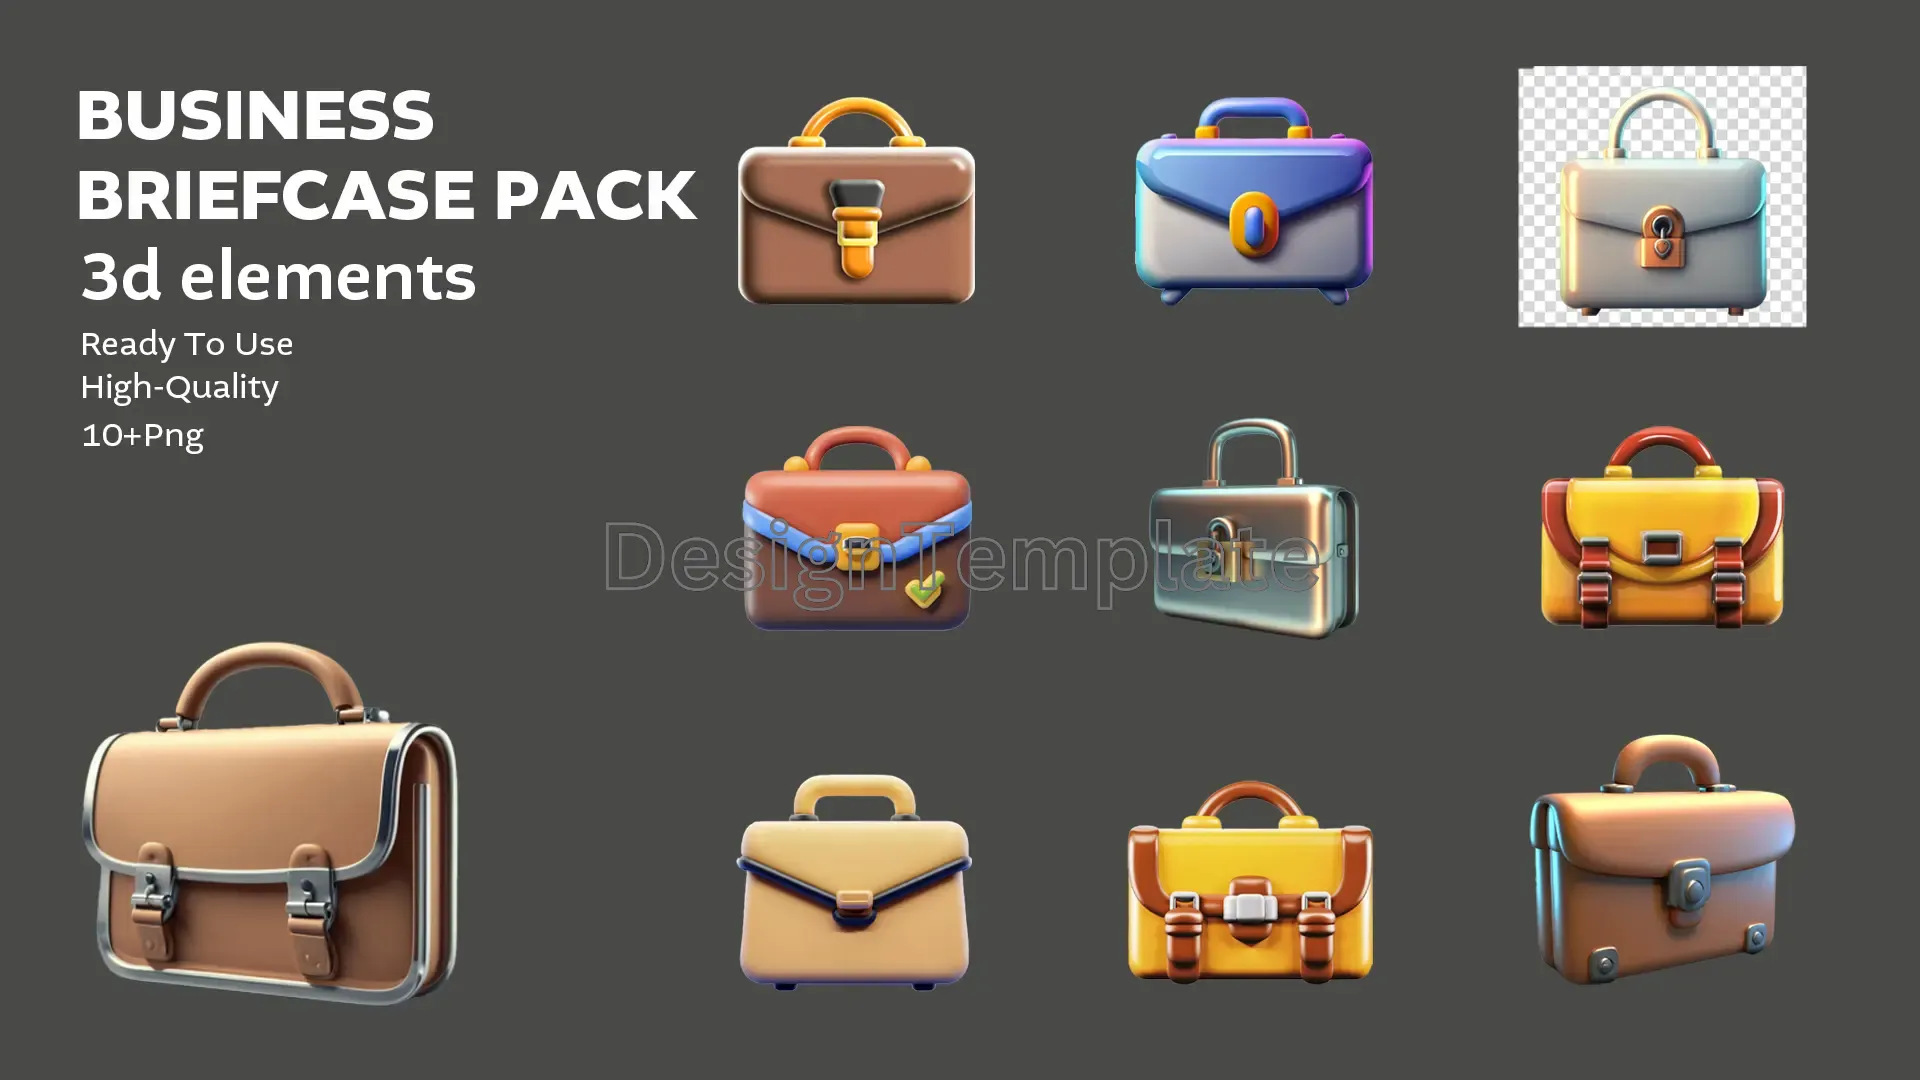 Professional Gear Business Briefcase 3D Elements Pack